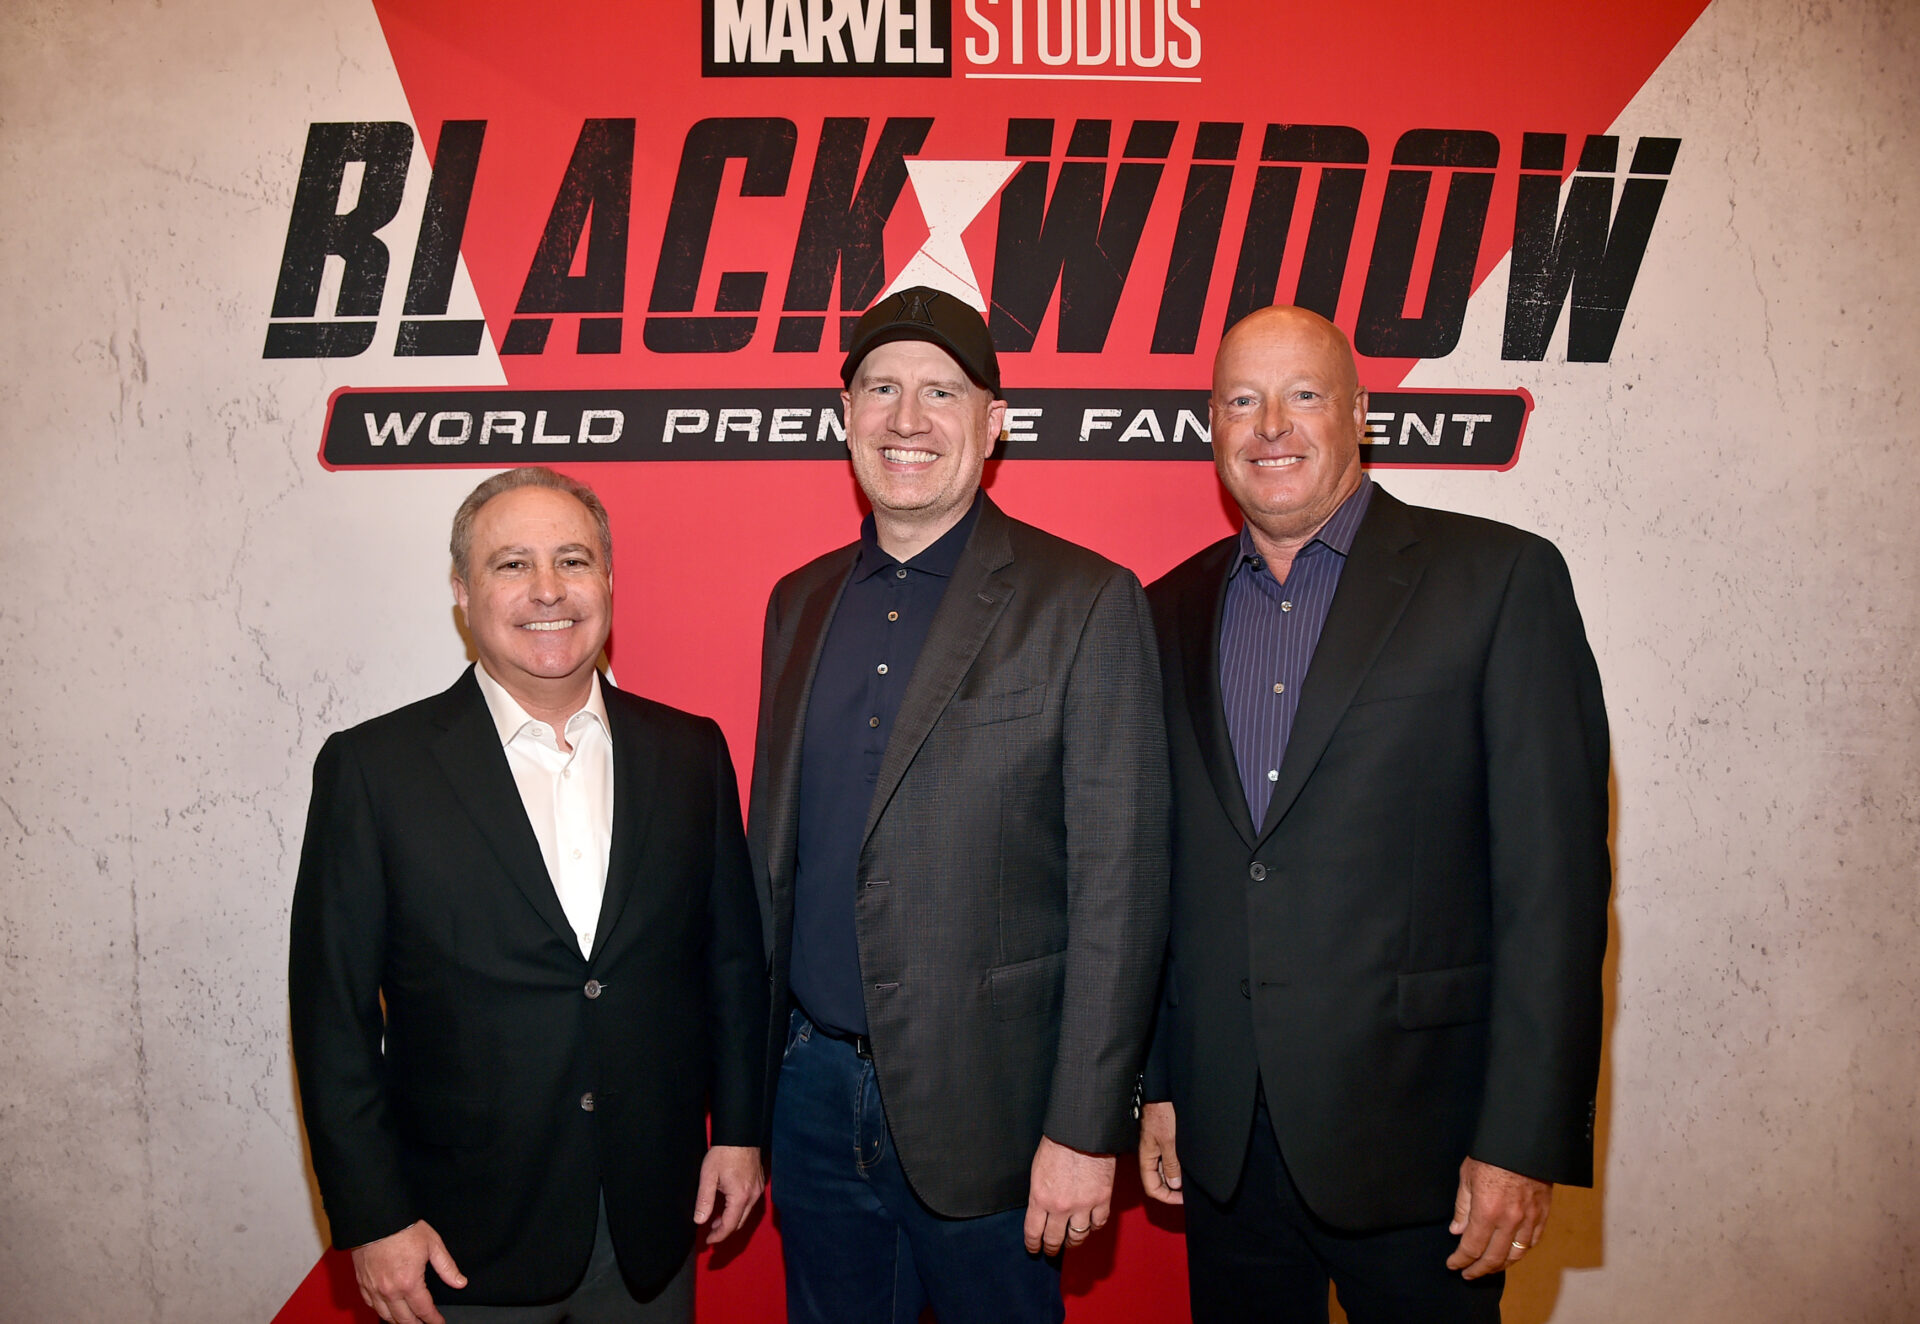 Alan Bergman (left), Kevin Feige (middle), and Bob Chapek (right) at the premiere of Black Widow (2021).